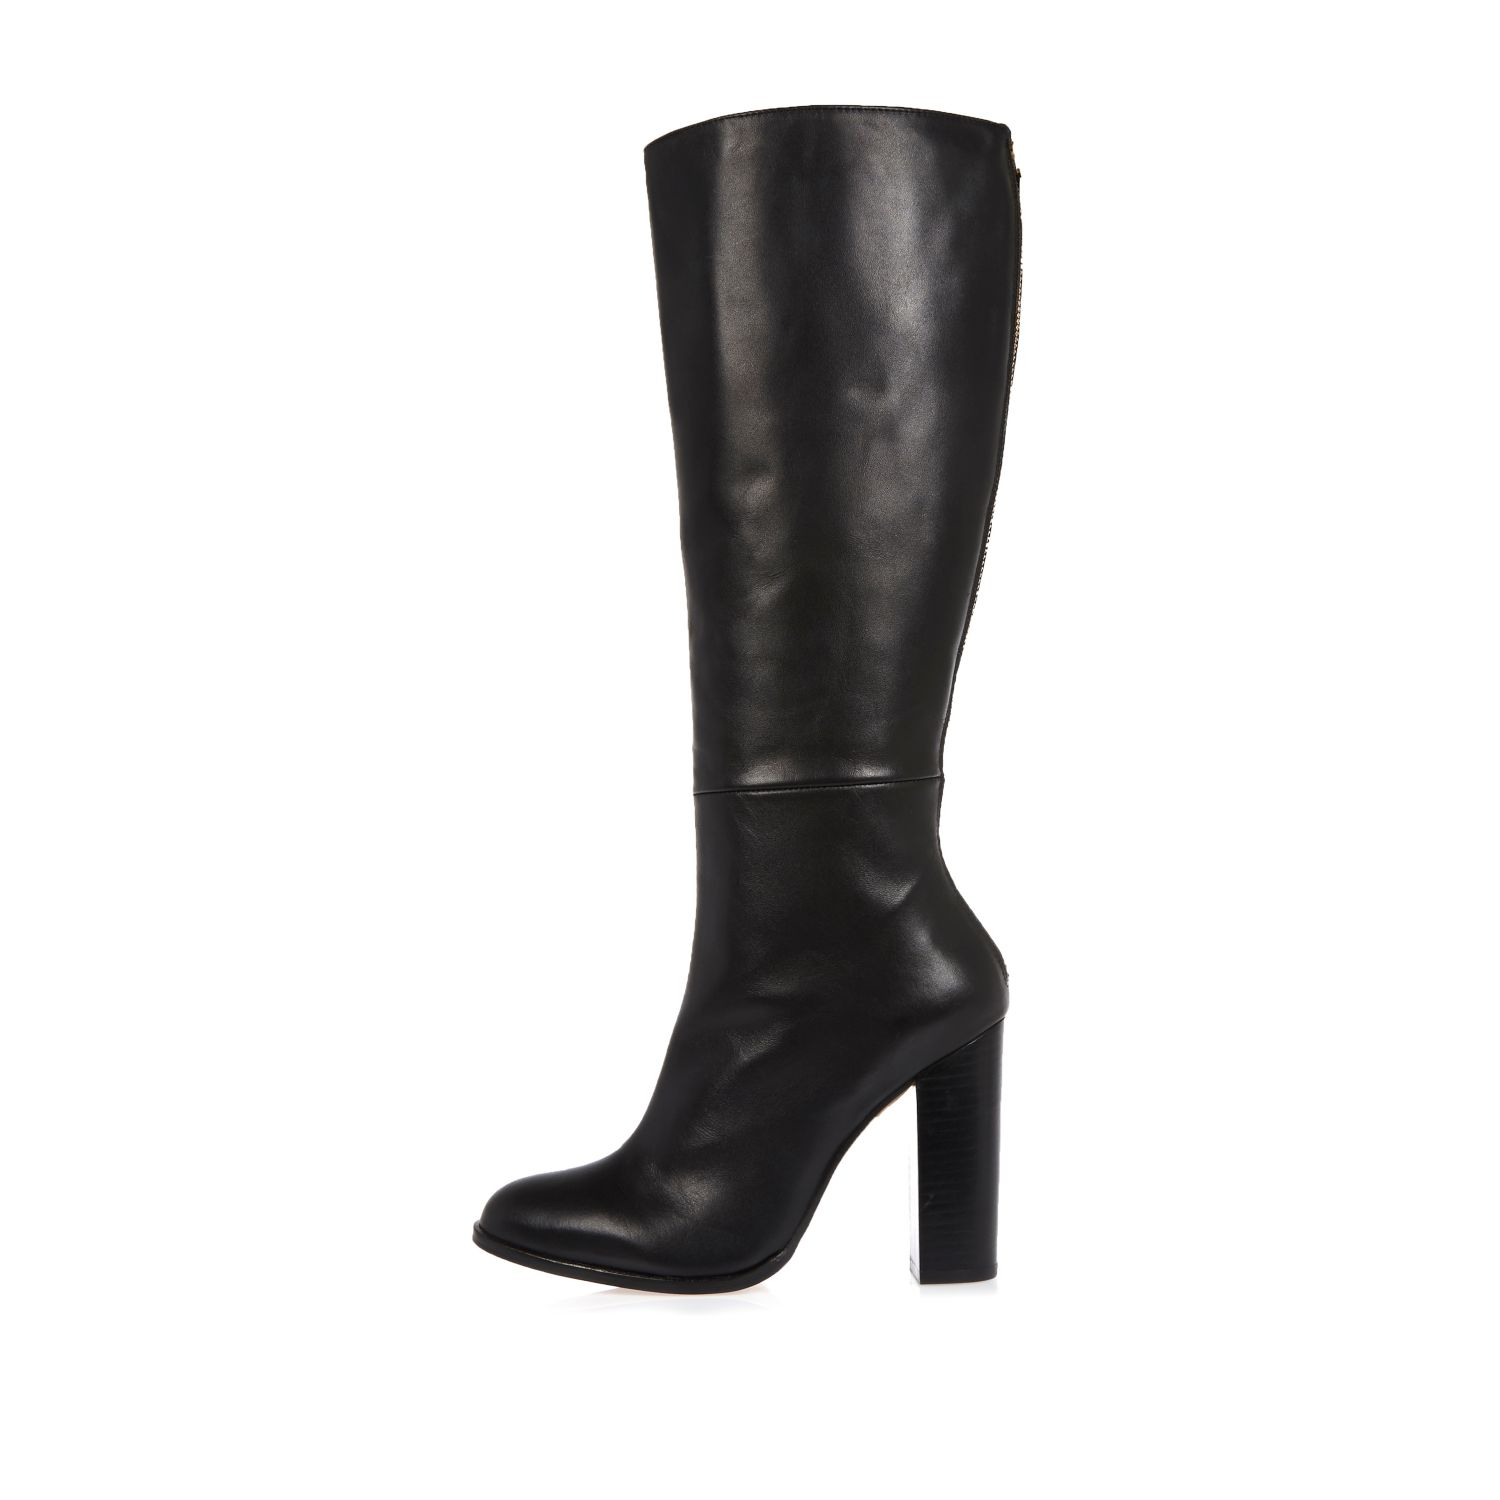 Lyst - River Island Black Leather Knee High Heeled Boots in Black